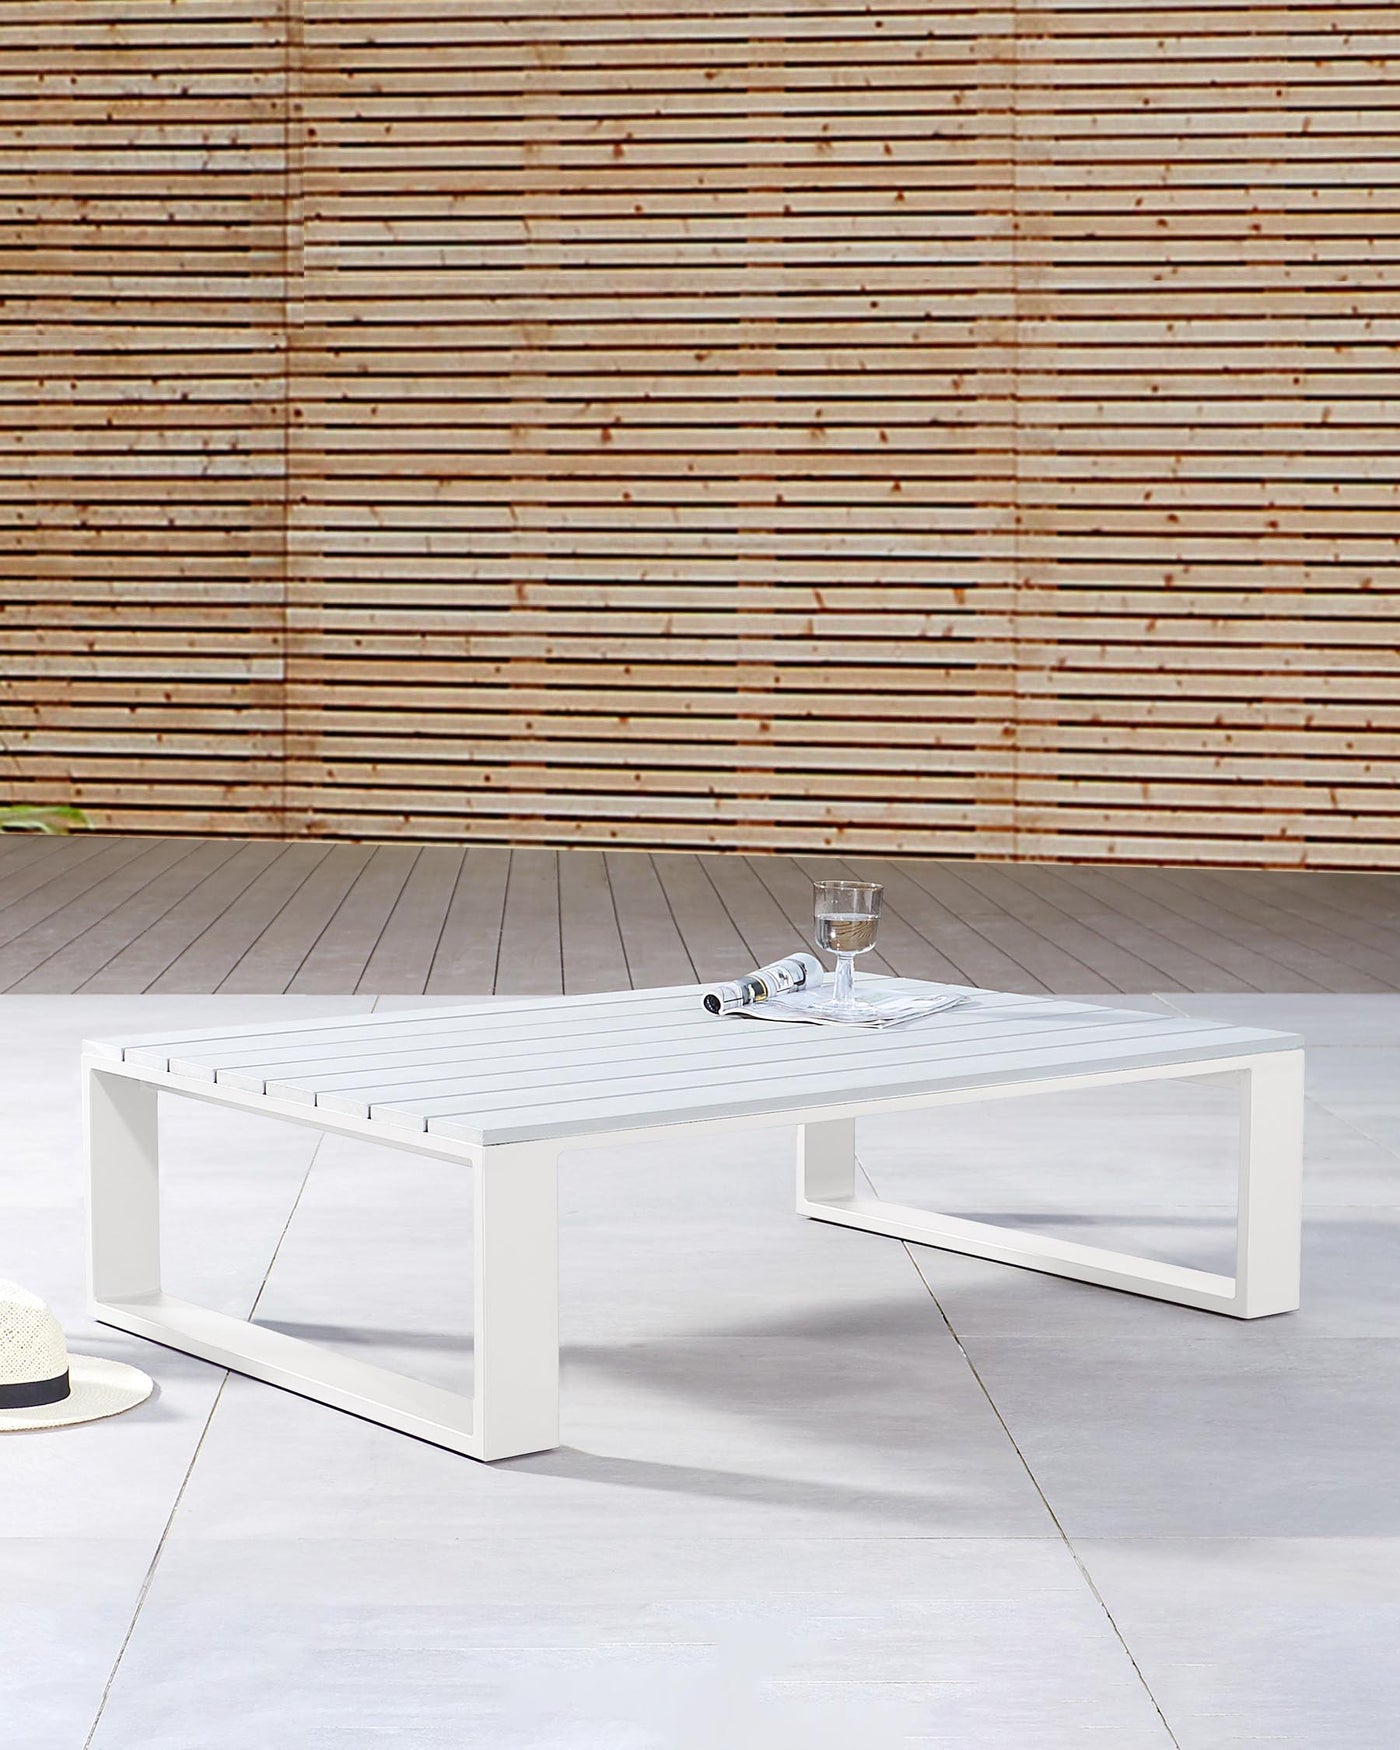 Modern outdoor white rectangular coffee table with a minimalistic design, featuring clean lines and a slatted top, set on a patio with a wooden slat background.